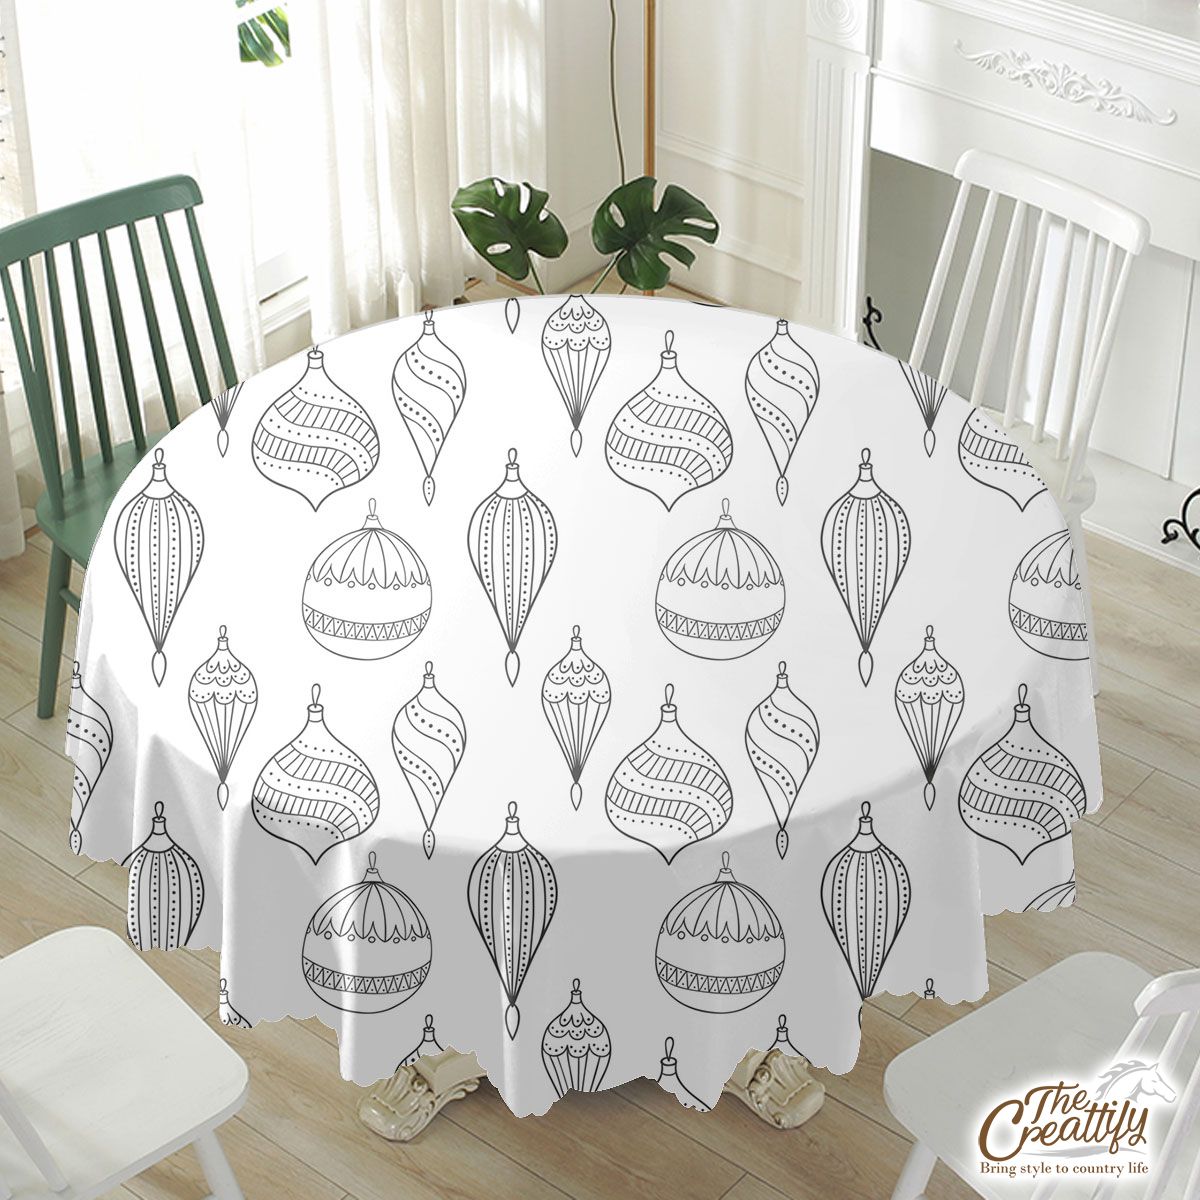 Black And White Christmas Ball Waterproof Tablecloth